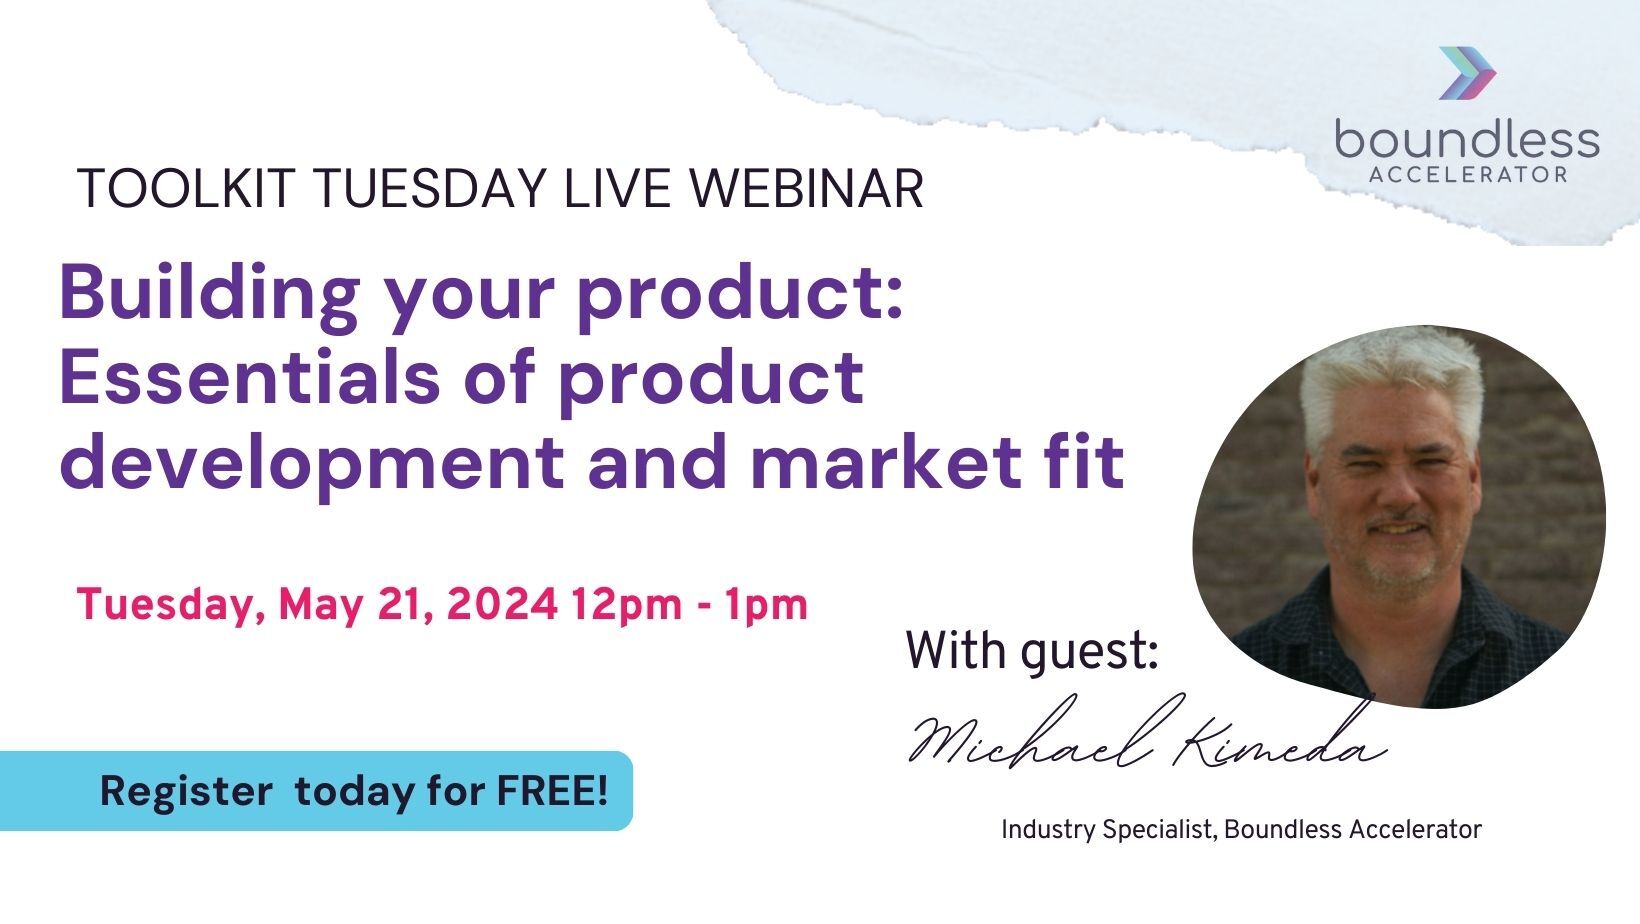 Toolkit Tuesday Live Webinar — Building Your Product: Essentials of Product Development and Market Fit